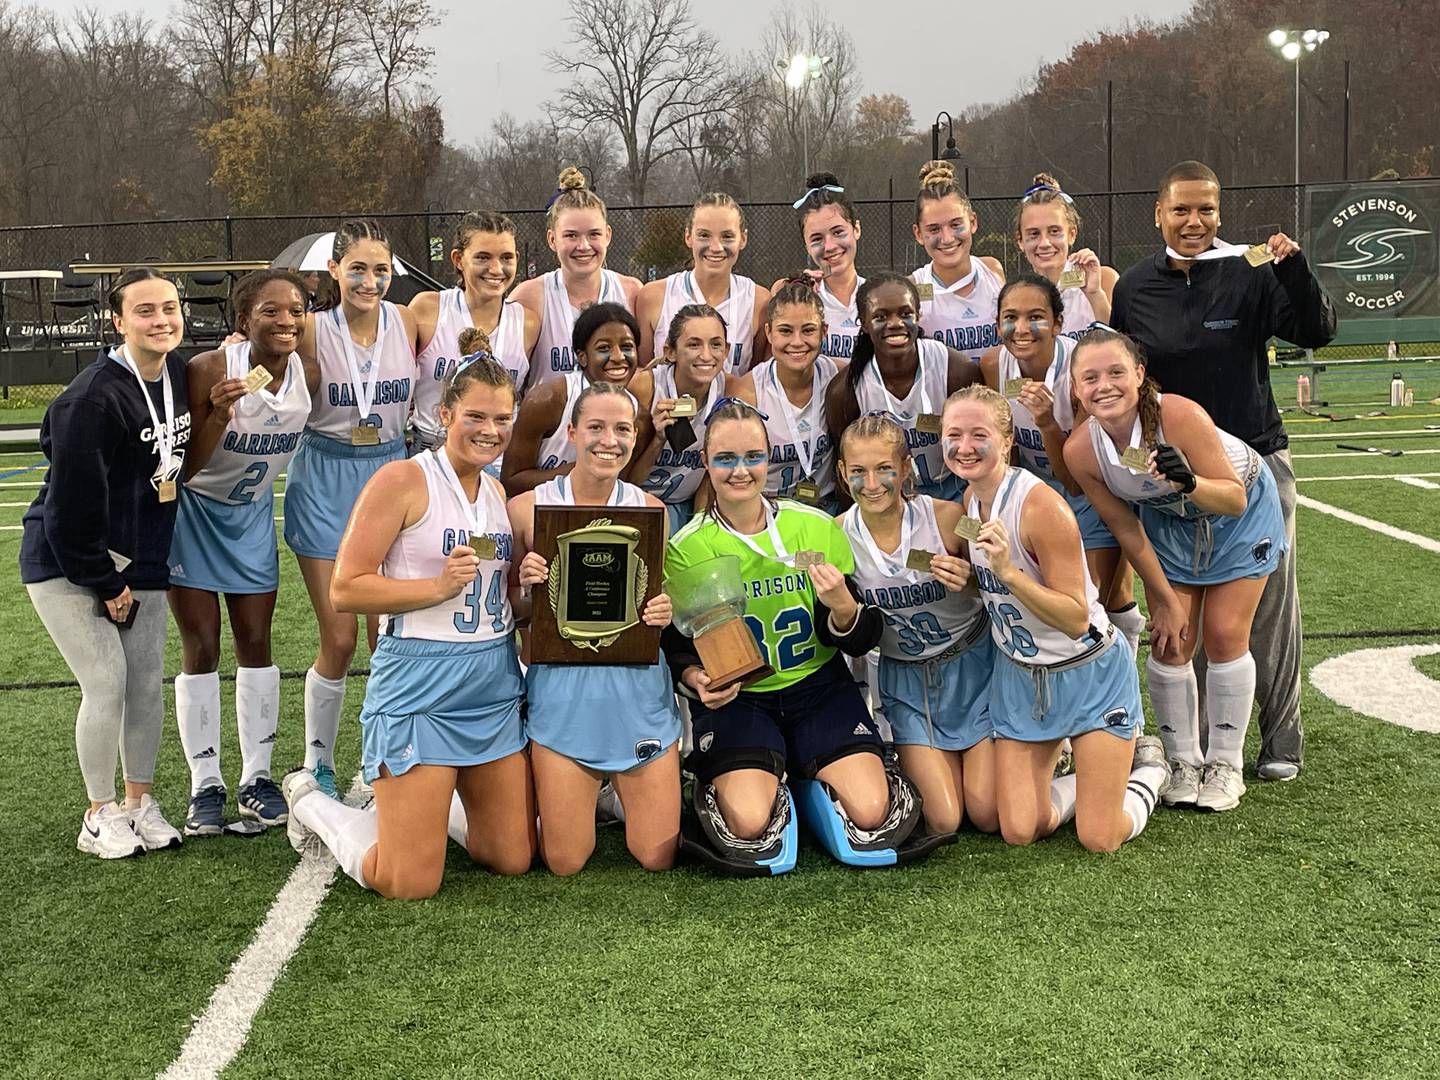 Garrison Forest won its second IAAM A Conference field hockey championship in three years and its seventh overall with a 3-1 win over defending champion Archbishop Spalding at Stevenson University Sunday afternoon. The Grizzlies did not lose to an A Conference opponent this season.